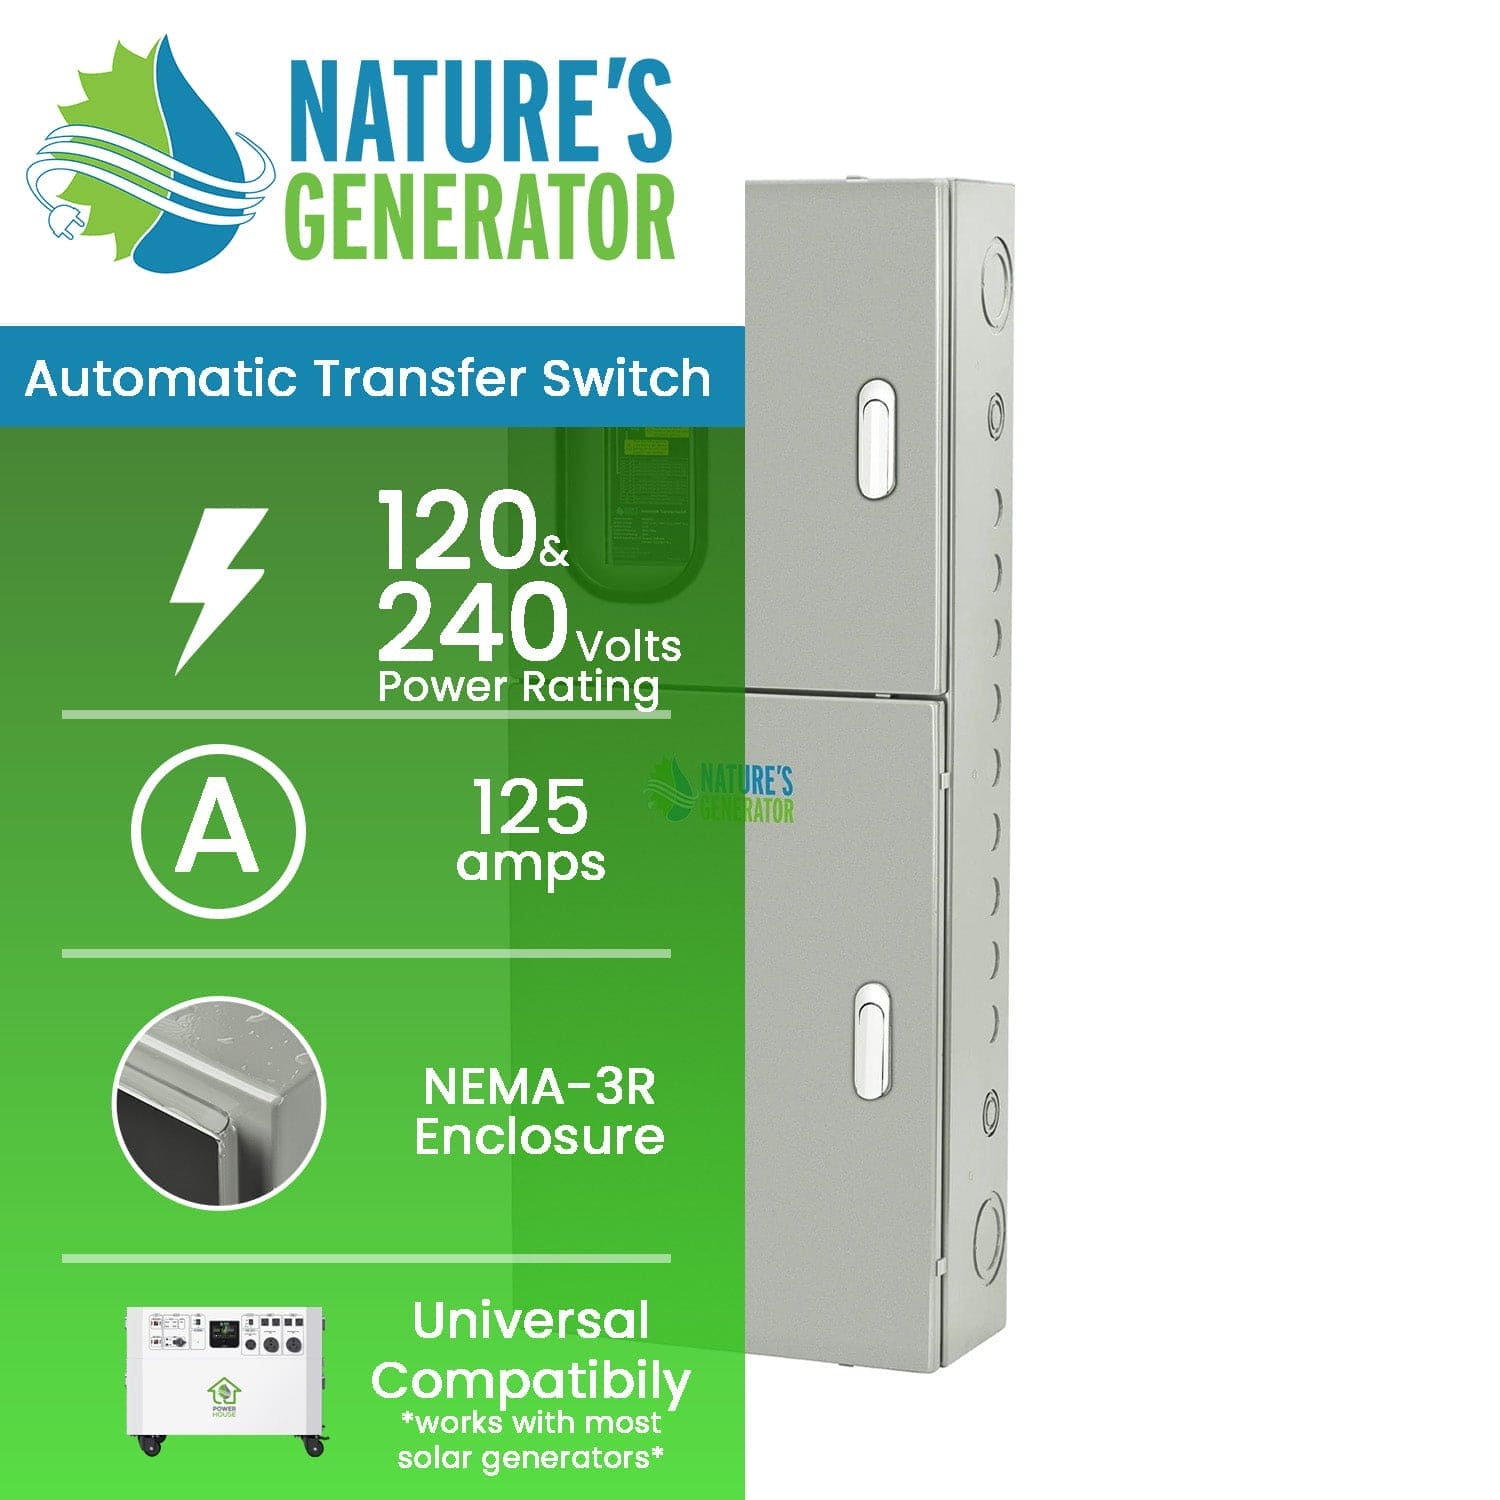 Nature's Generator 125A Automatic Transfer Switch - Nature's Generator